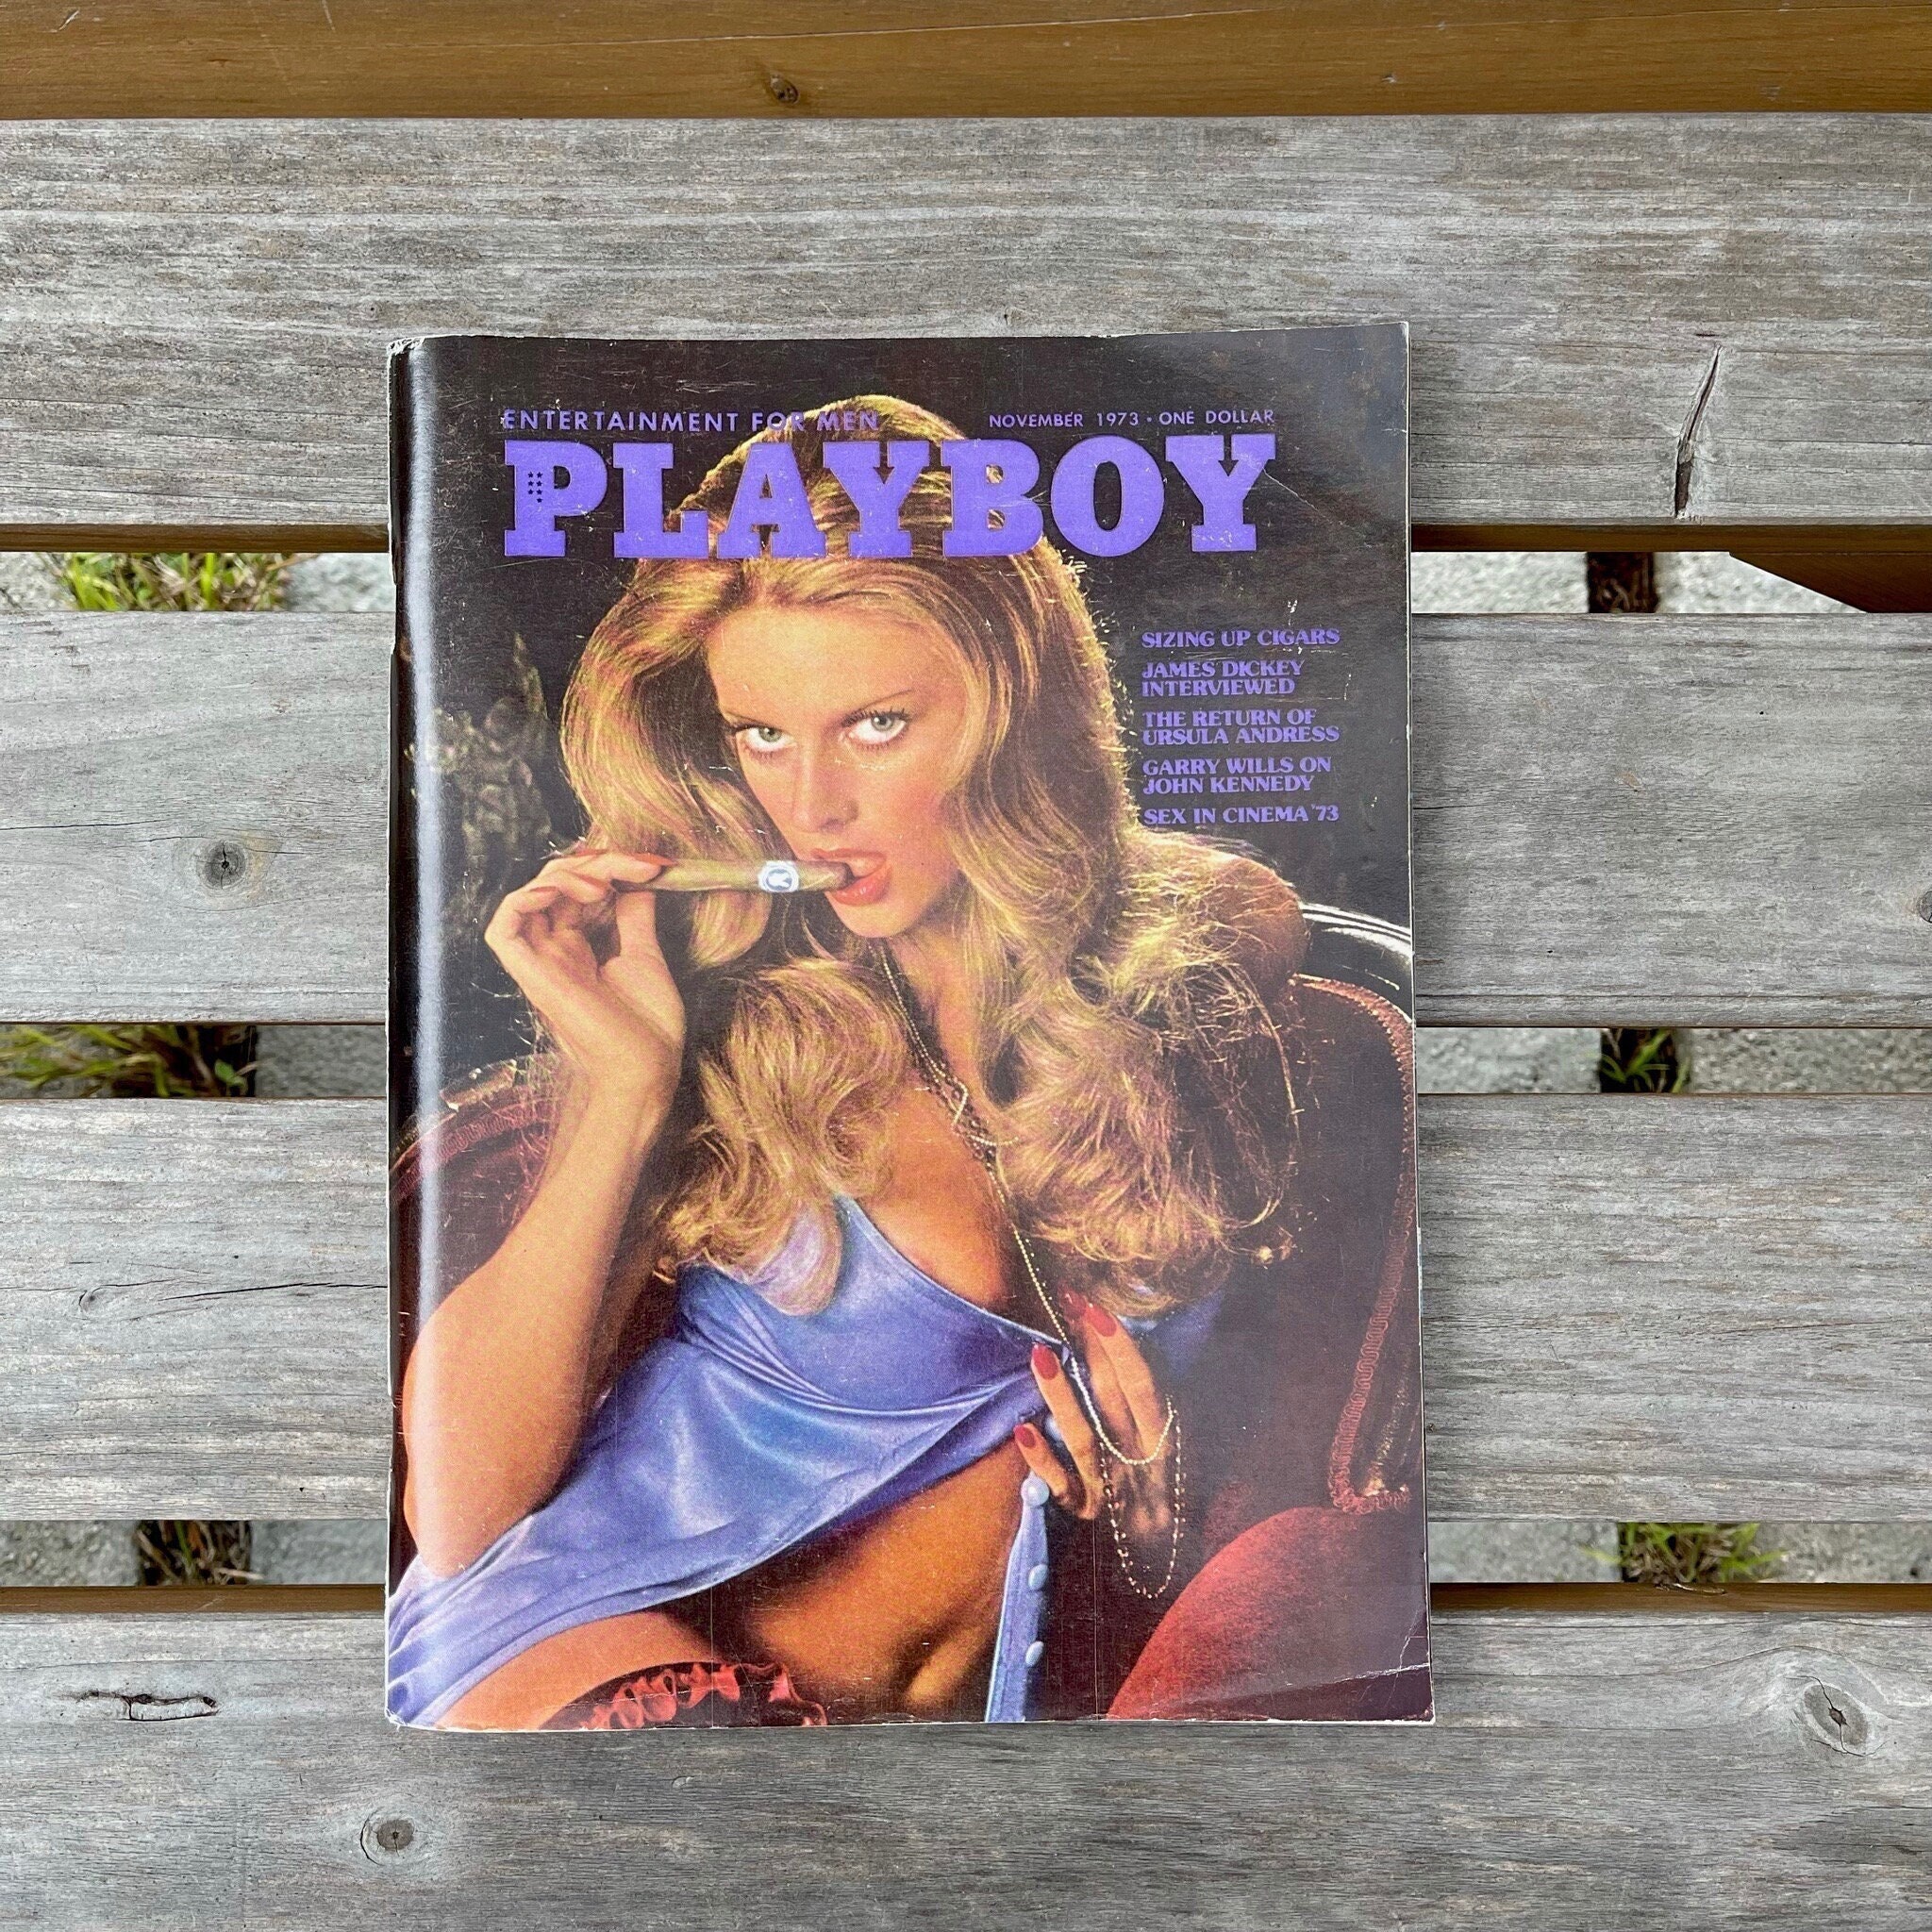 Best of Ursula andress in playboy